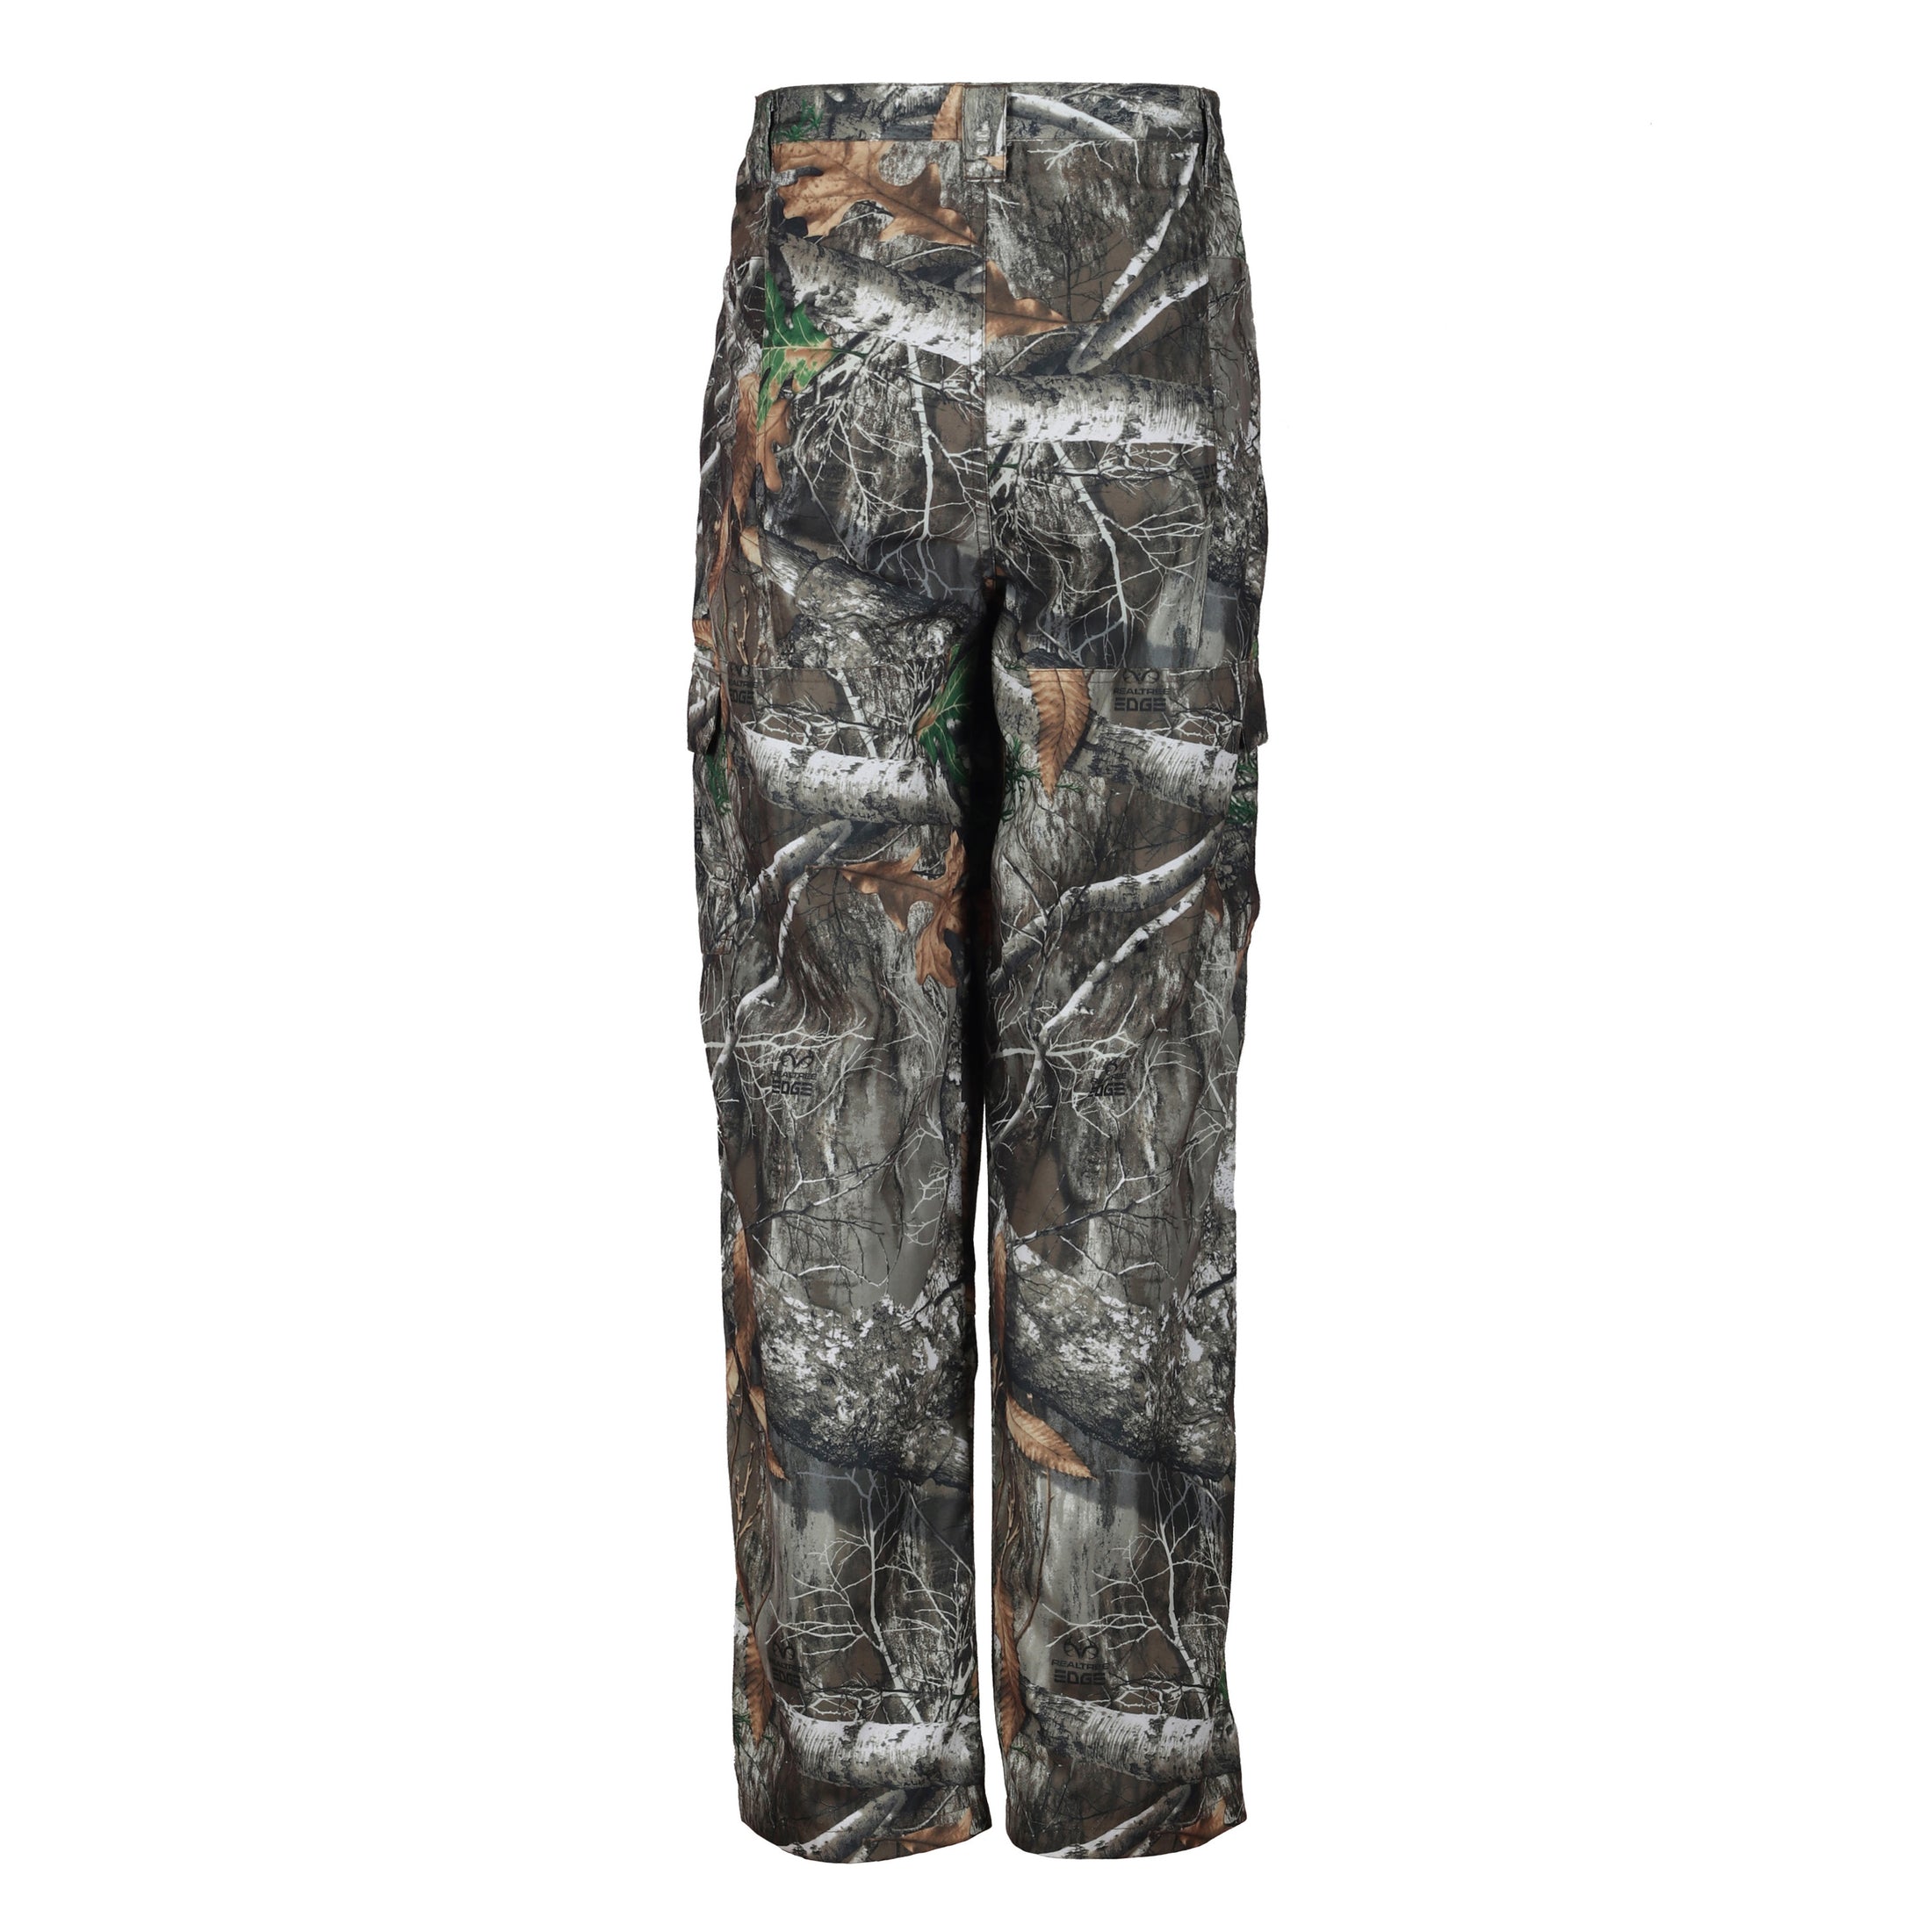 gamehide ElimiTick Tactical Style Eight Pocket Field Pant back (realtree edge)